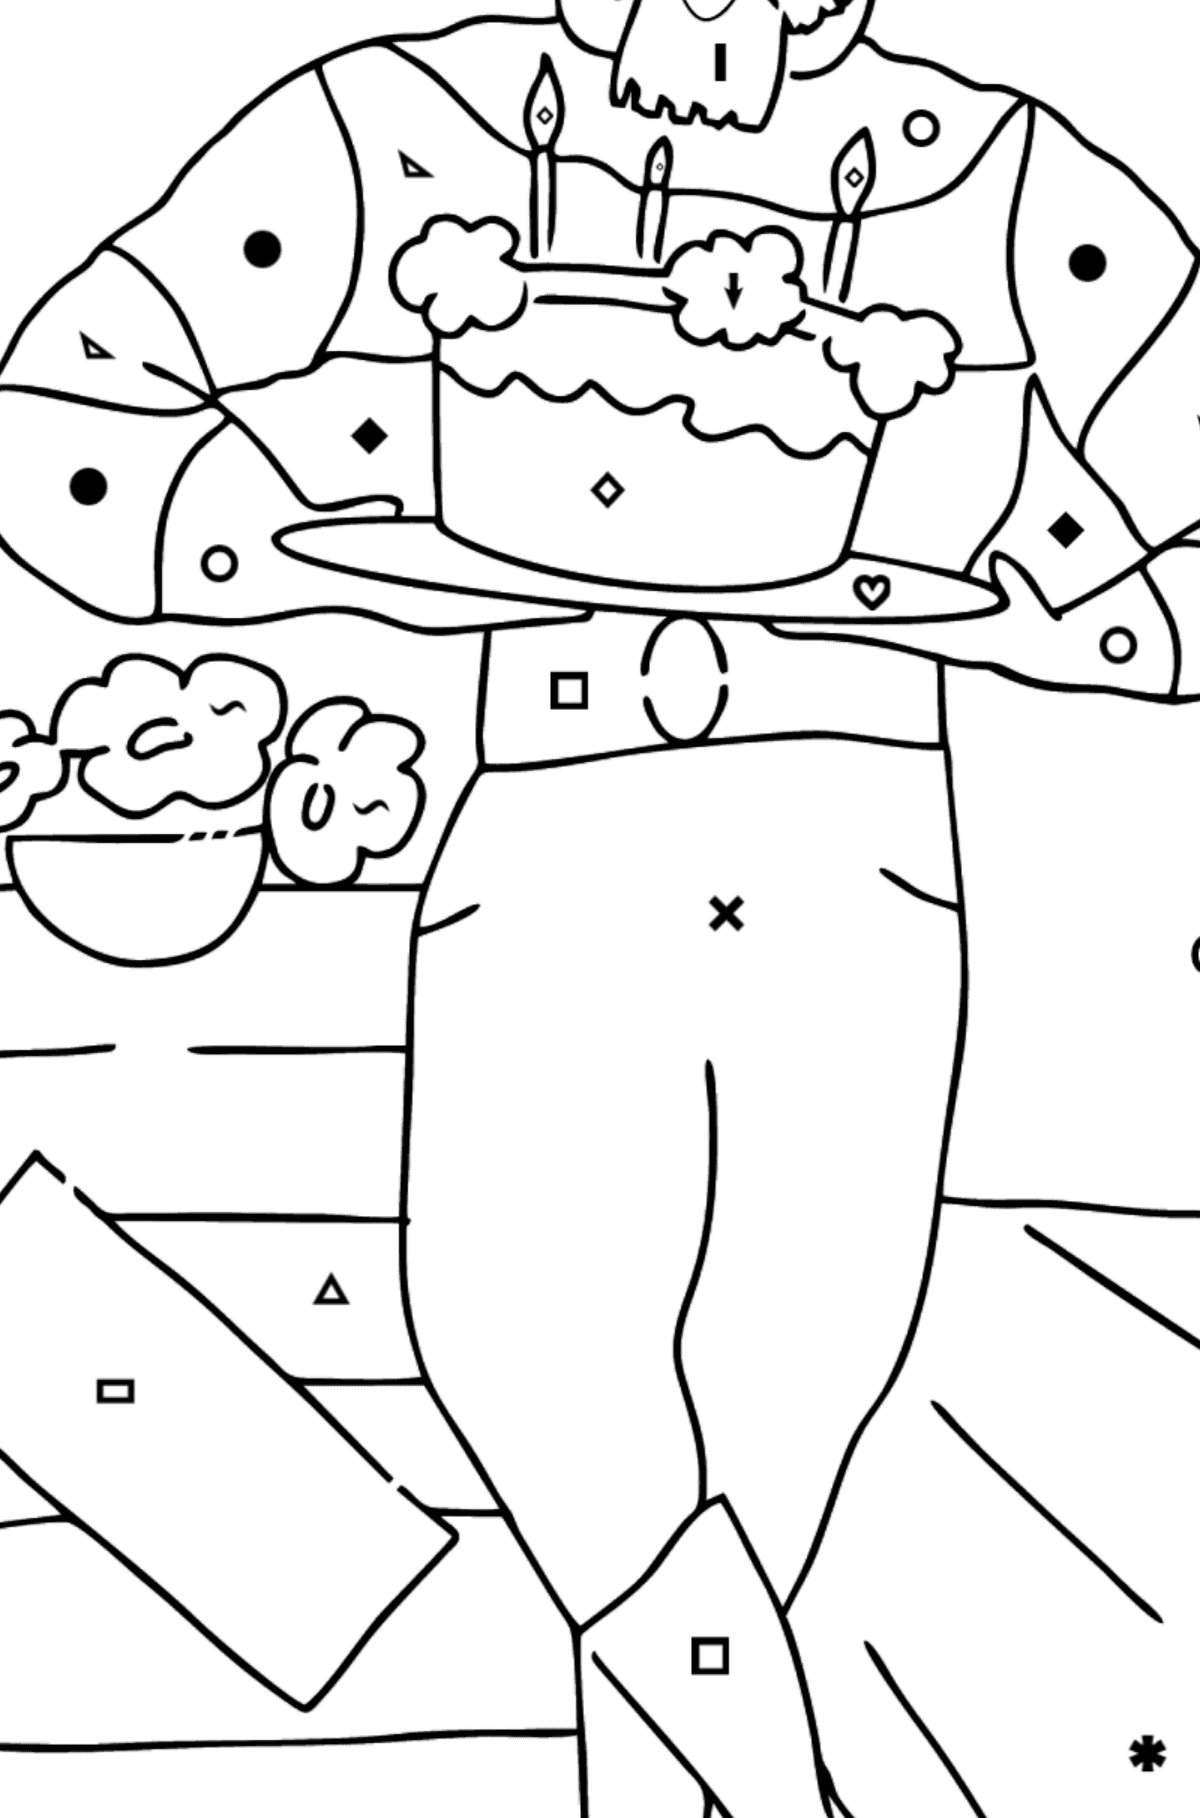 Coloring Page - A Pirate is Waiting for Guests - Coloring by Symbols and Geometric Shapes for Kids